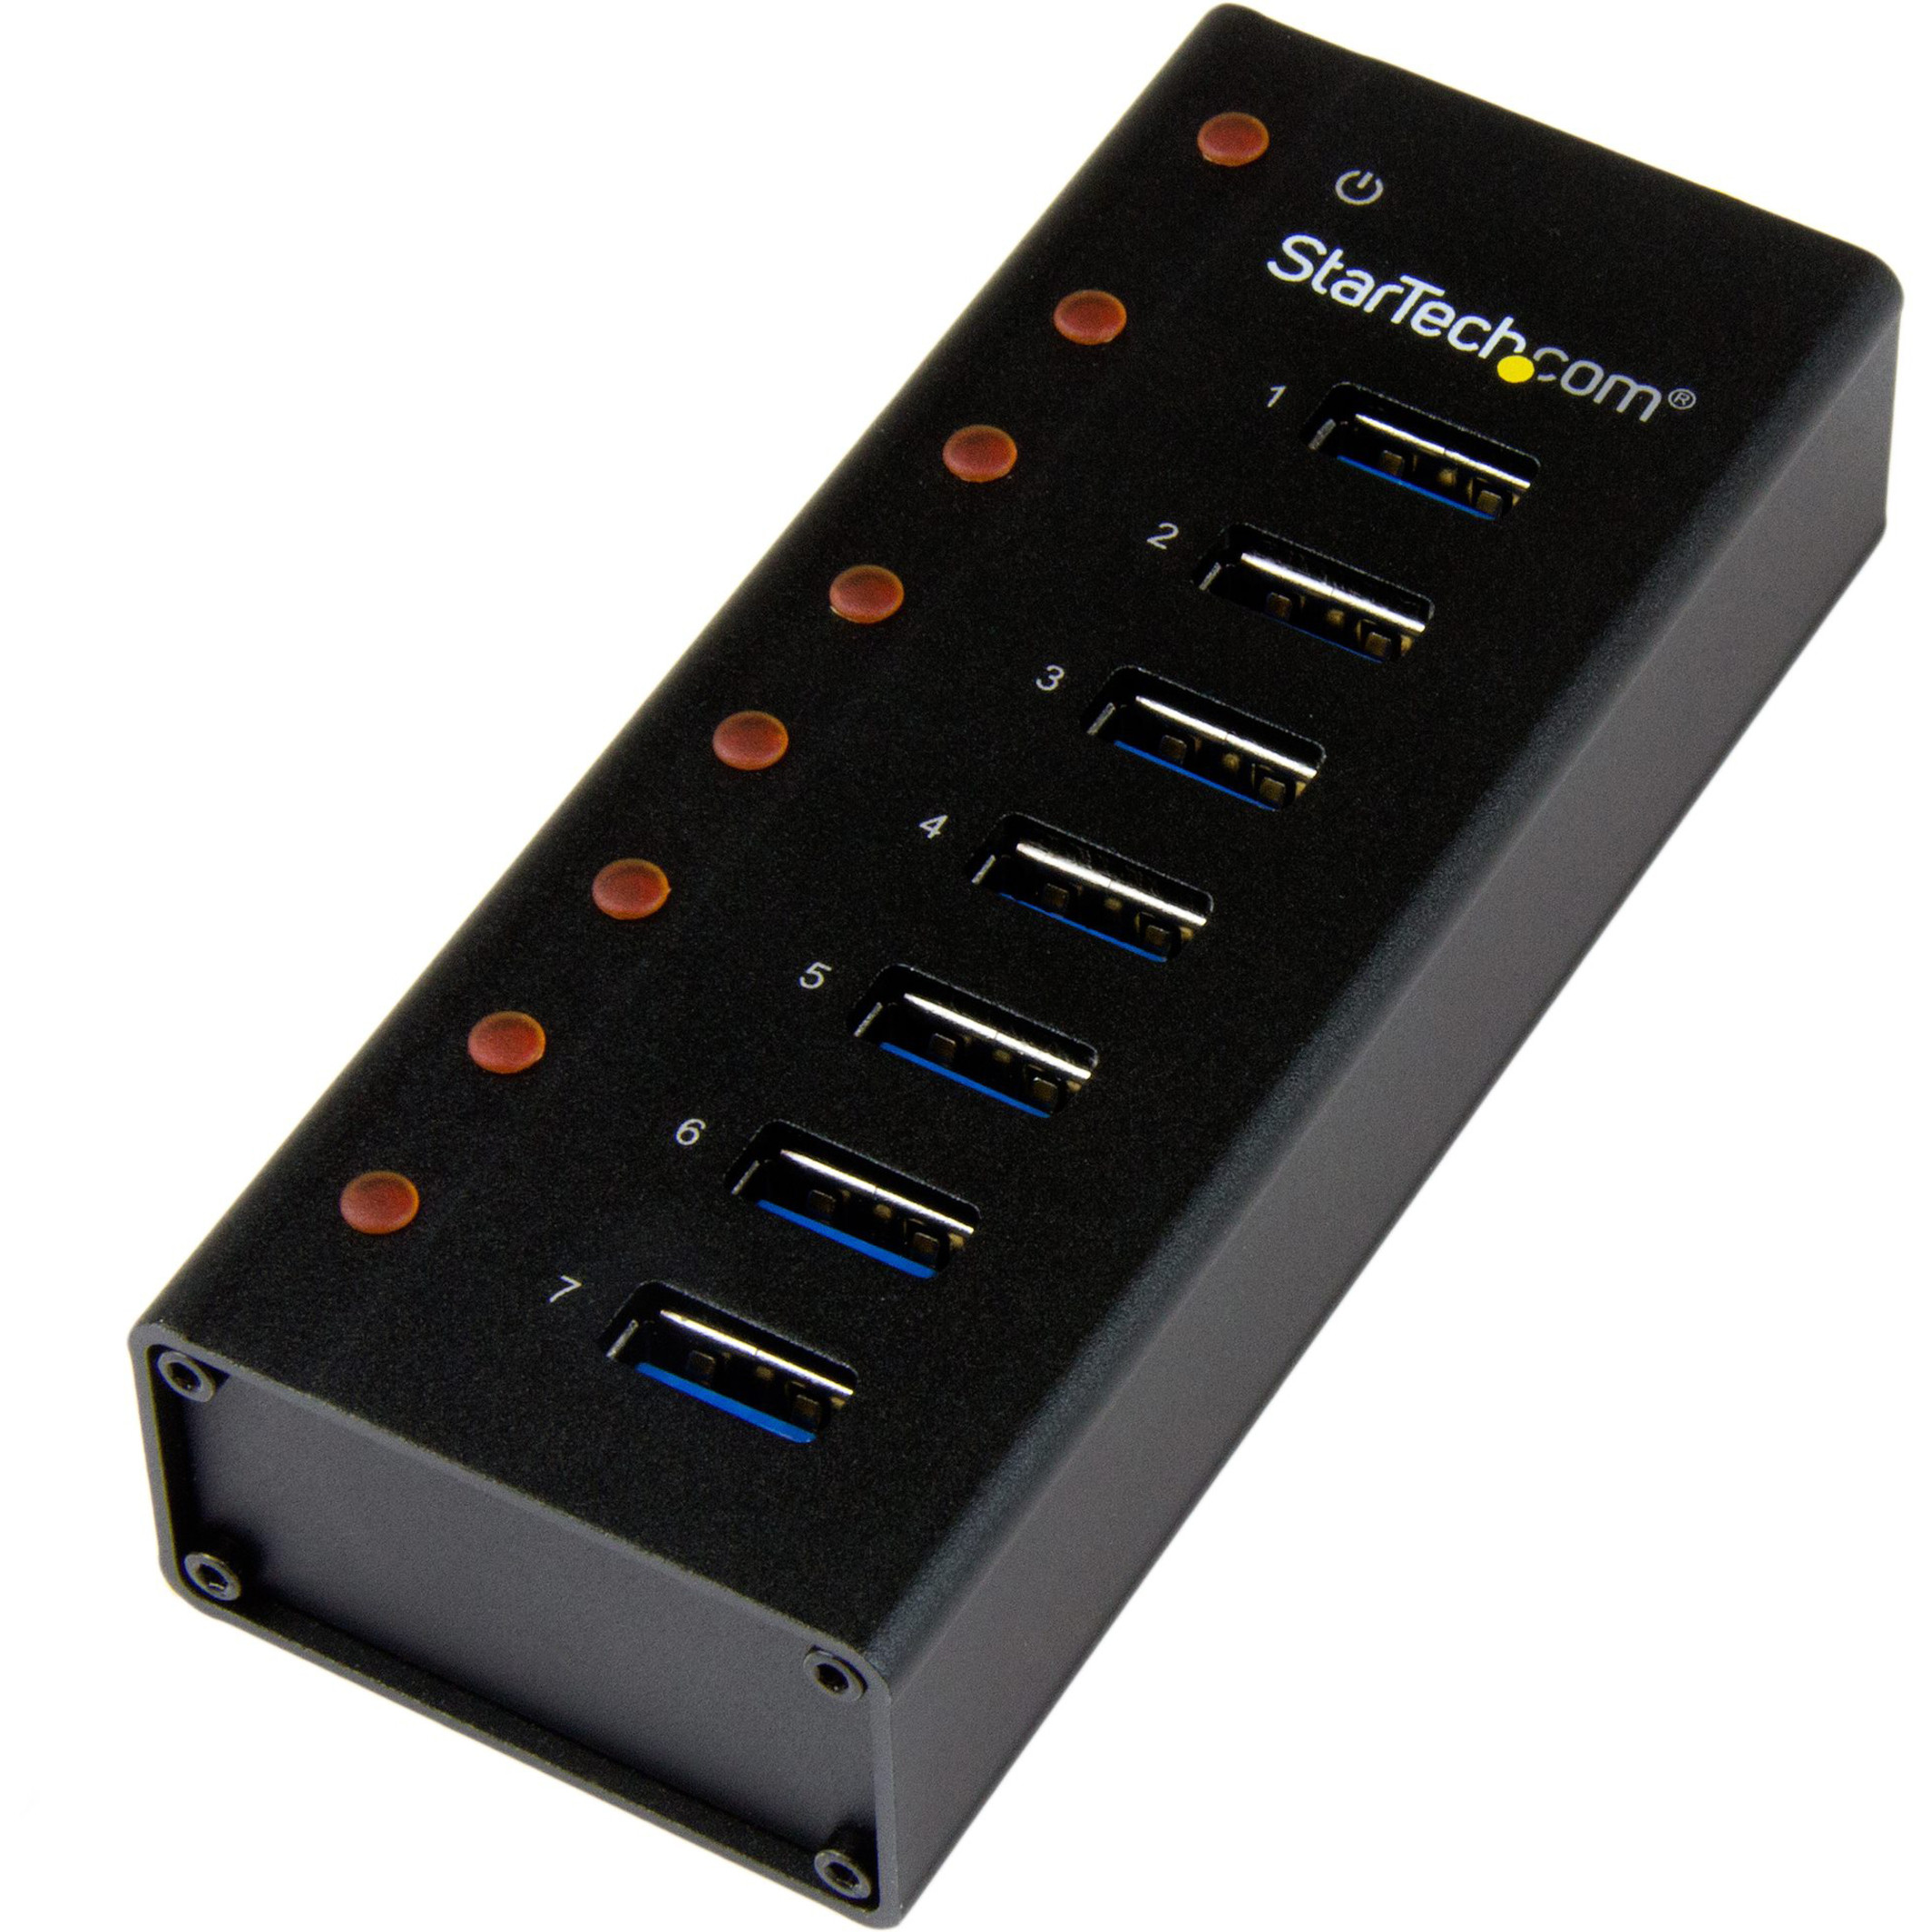 Startech .com 7 Port USB 3.0 HubDesktop or Wall-mountable Metal EnclosureConnect 7 high-performance devices to your computer or Mac with… ST7300U3M